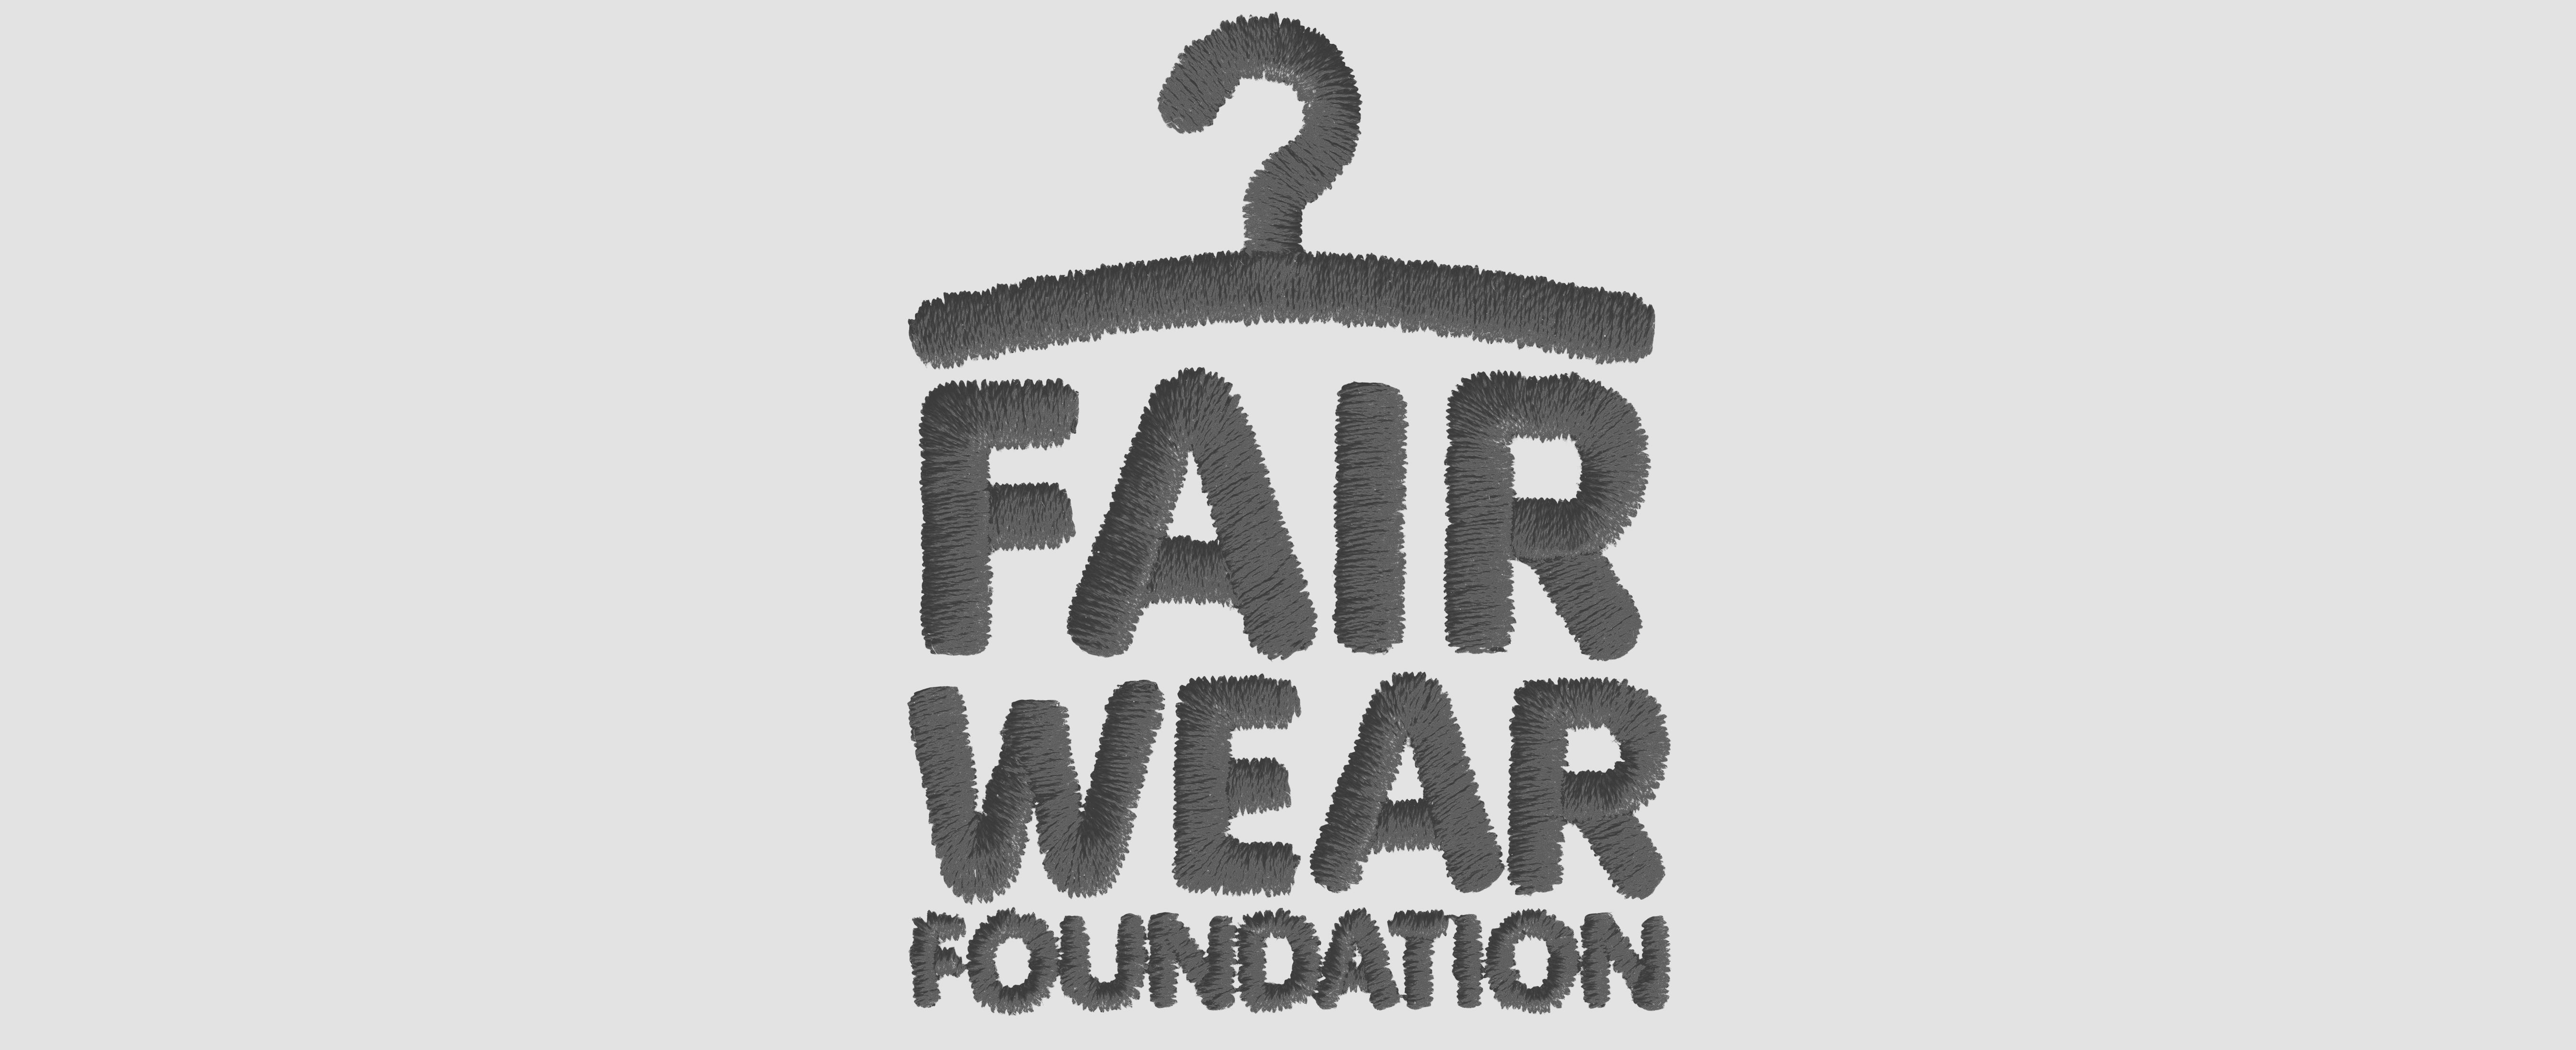 What Is The Fair Wear Foundation?